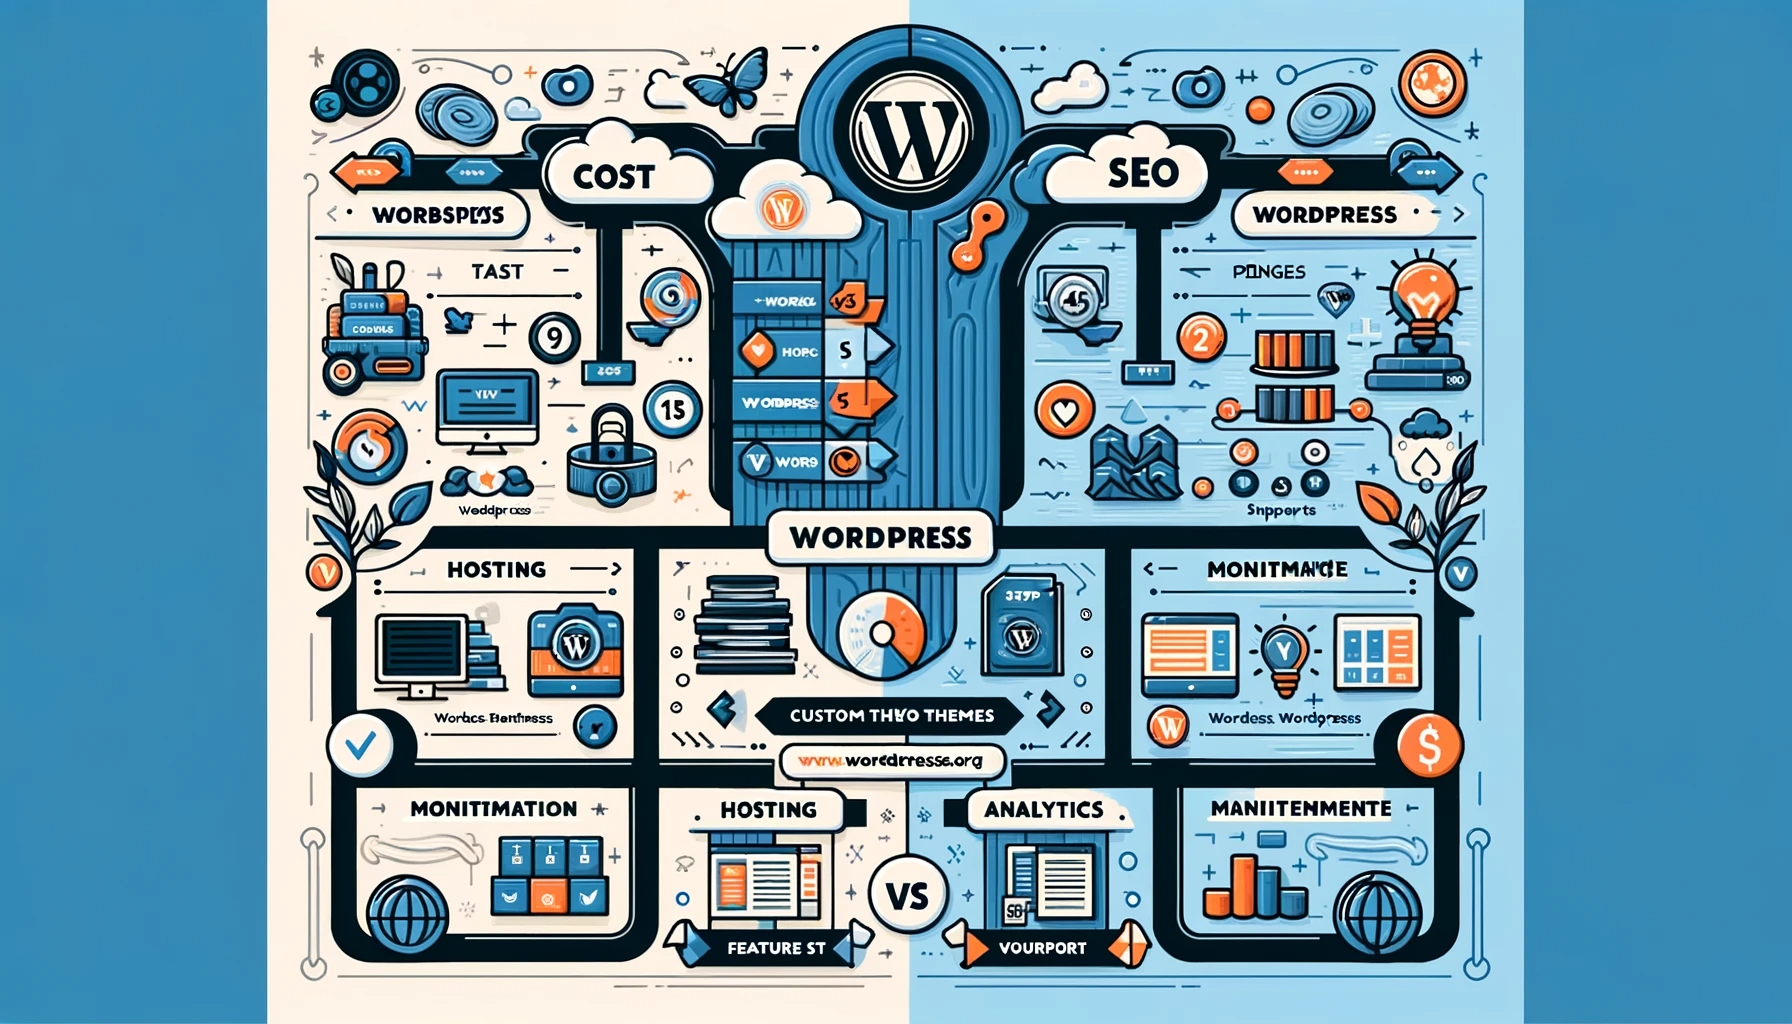 Illustrated WordPress infographic covering cost, SEO, hosting, and themes.